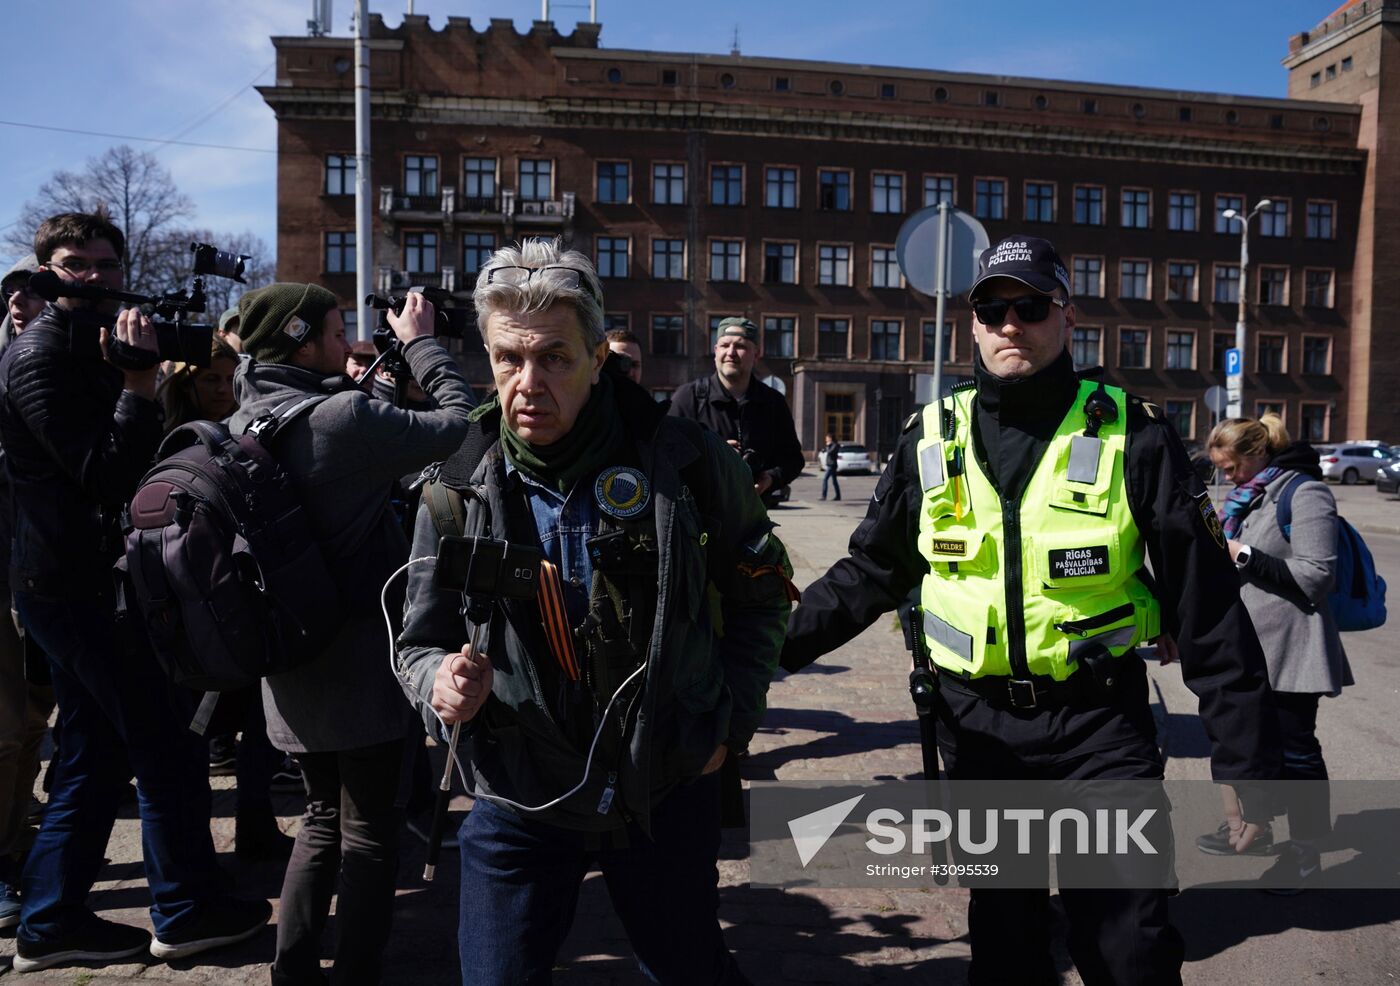 Radicals protest against Victory Day celebrations in Riga